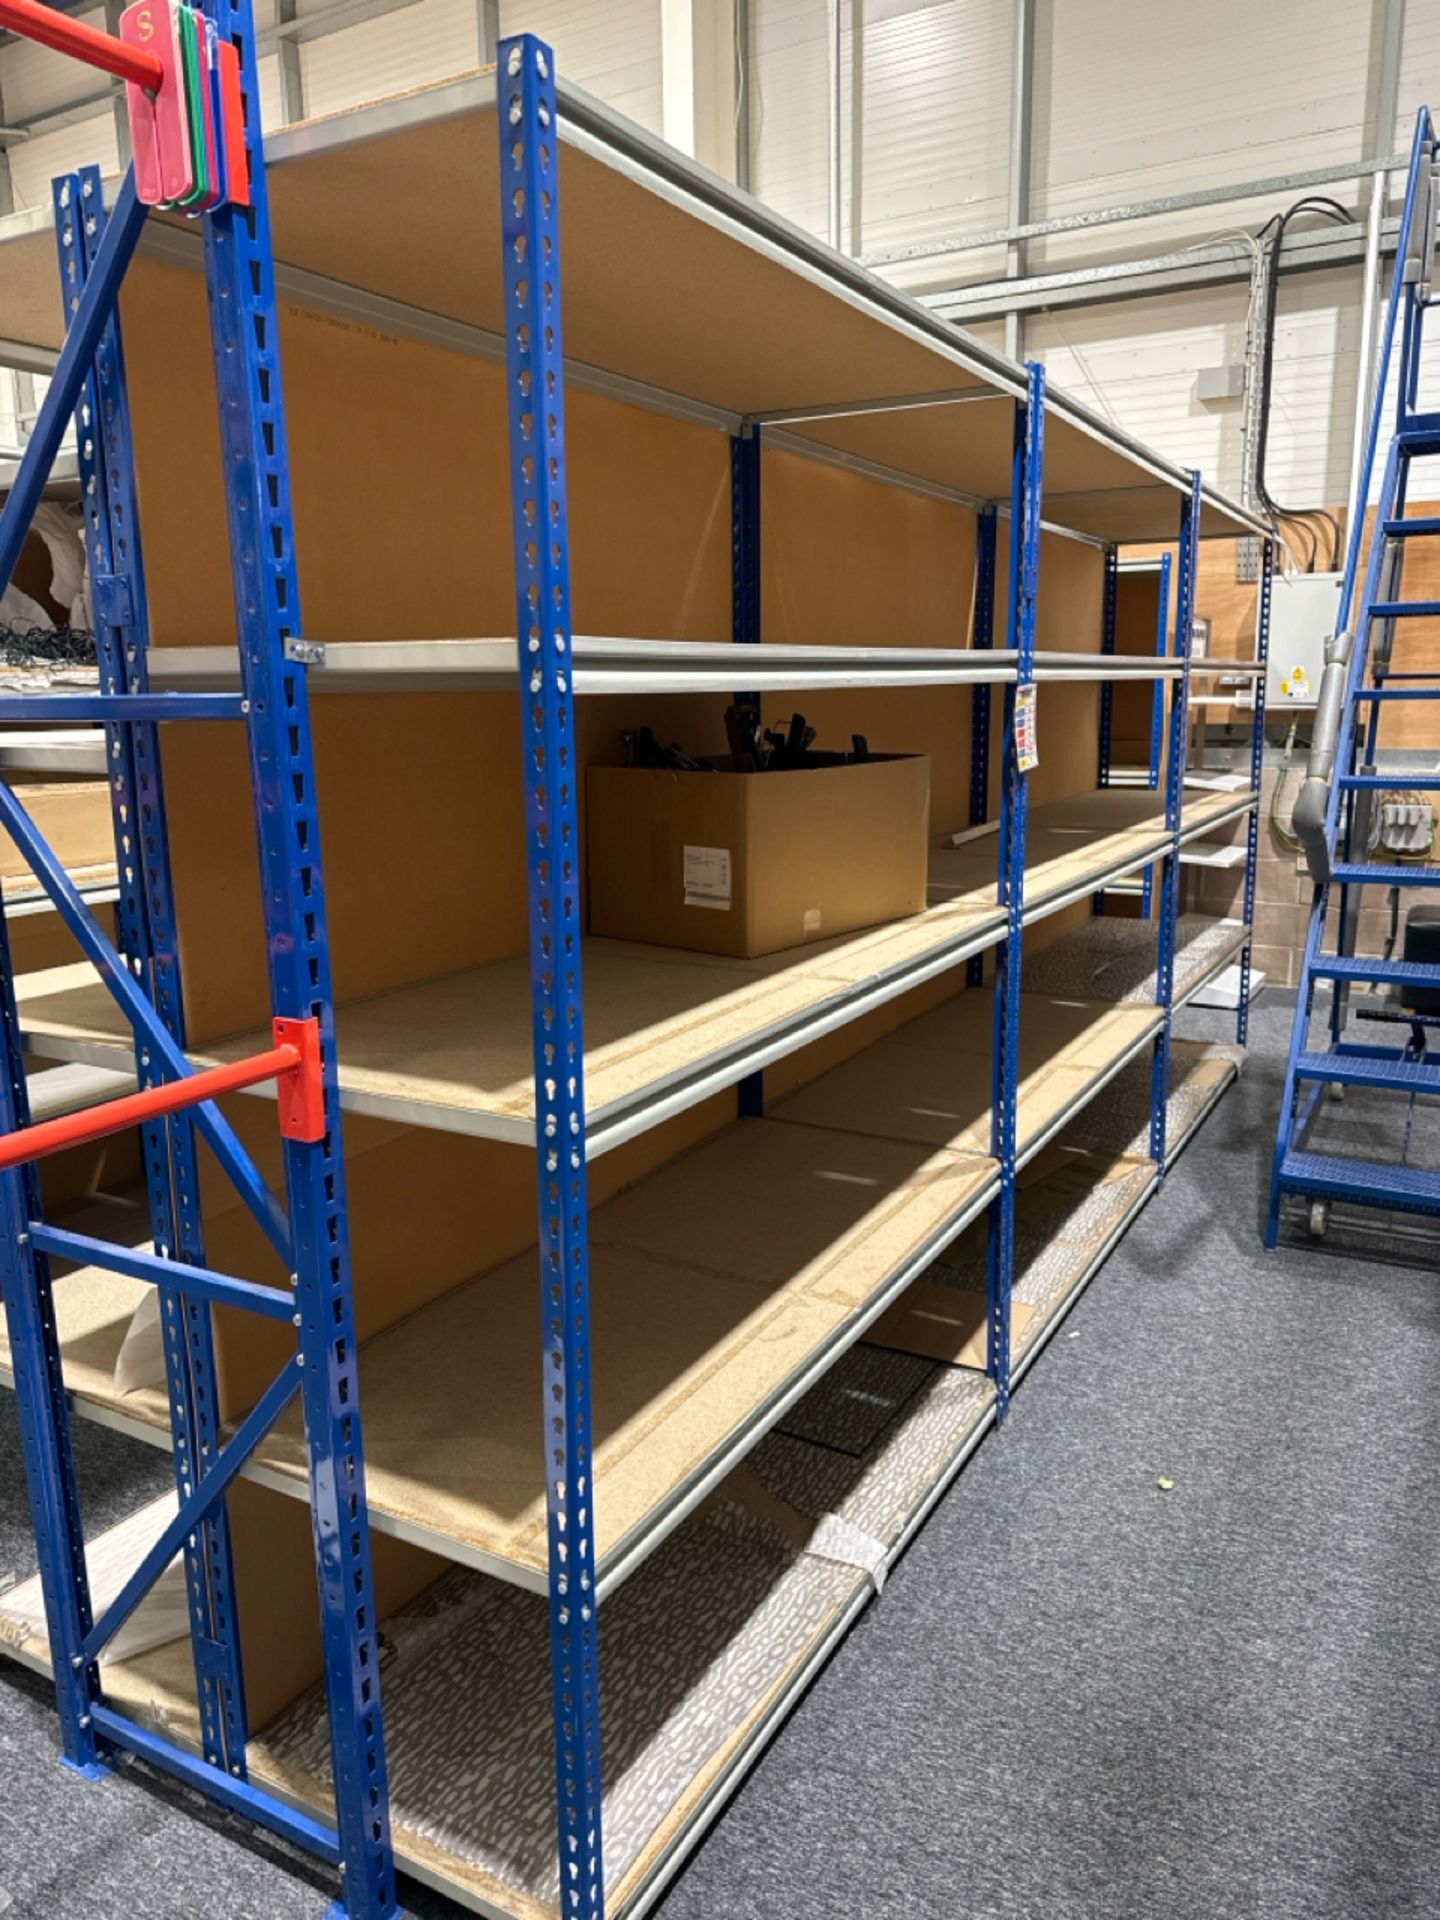 6 Bays Of Back To Back Boltless Racking - Image 2 of 5